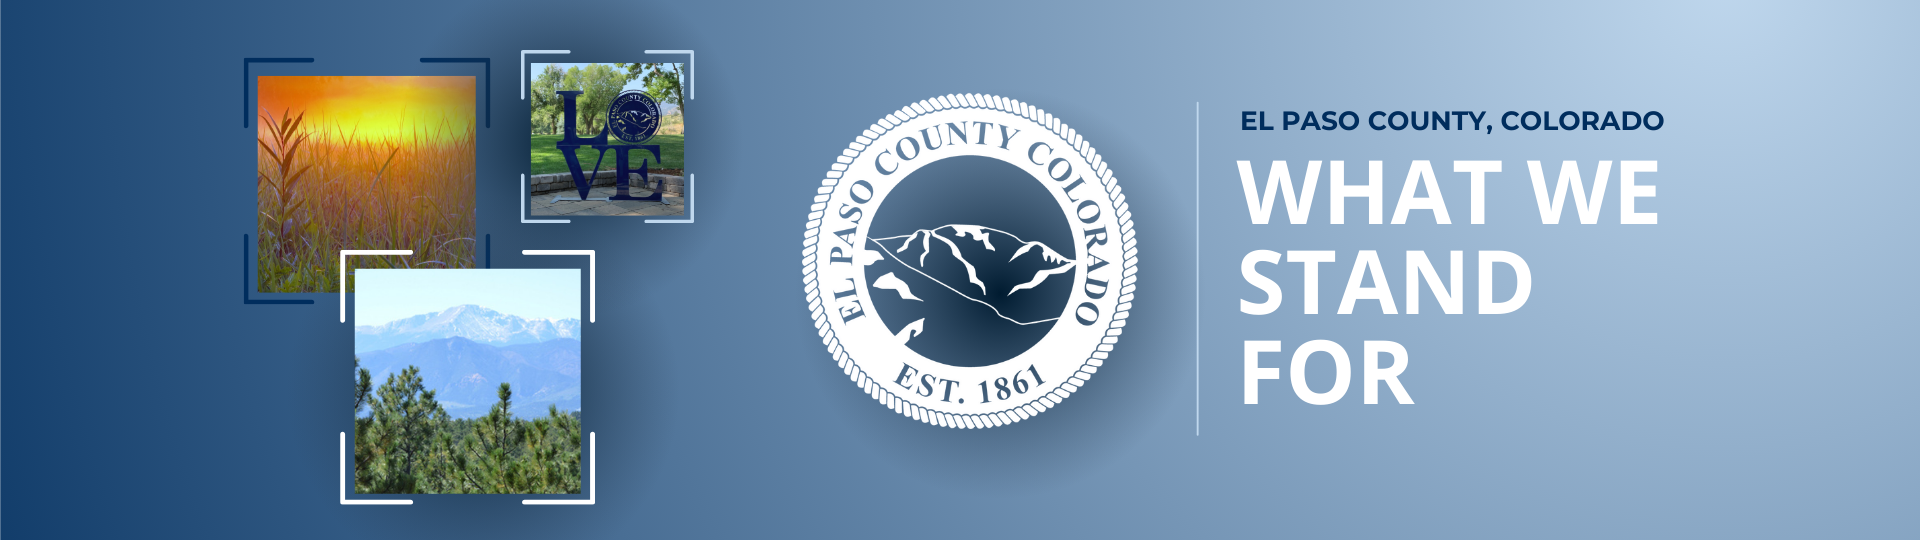 Blue gradient background with three images of landscape, el paso county white seal, blue text: El Paso County, White Text: What We Stand For